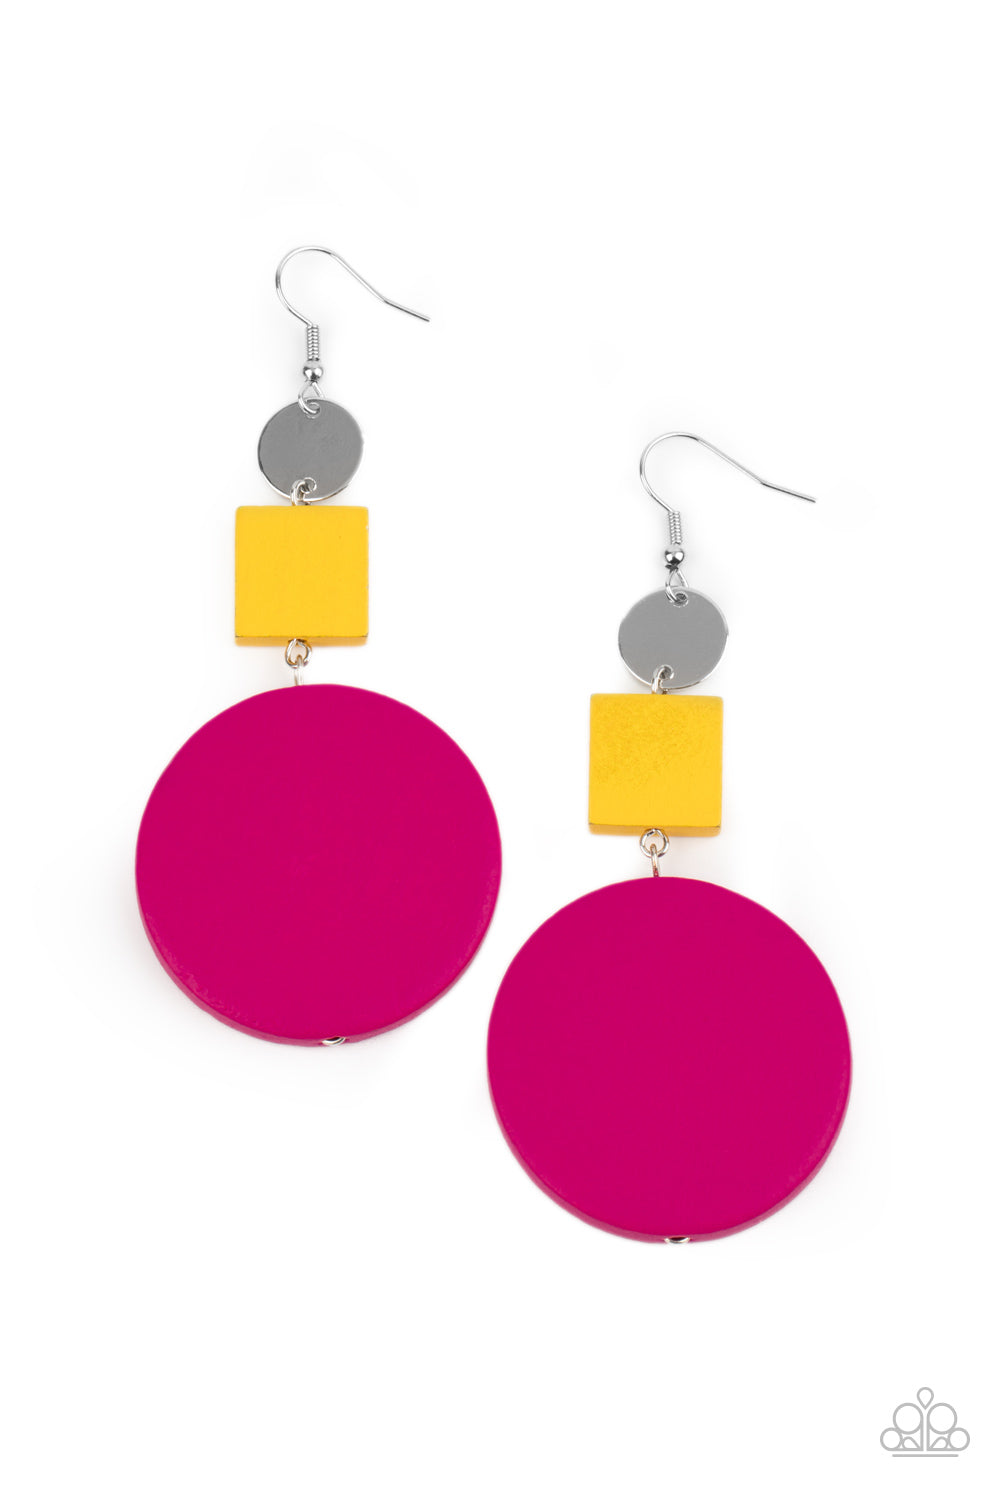 Paparazzi Accessories Modern Materials  - Pink Wood Earrings - Lady T Accessories